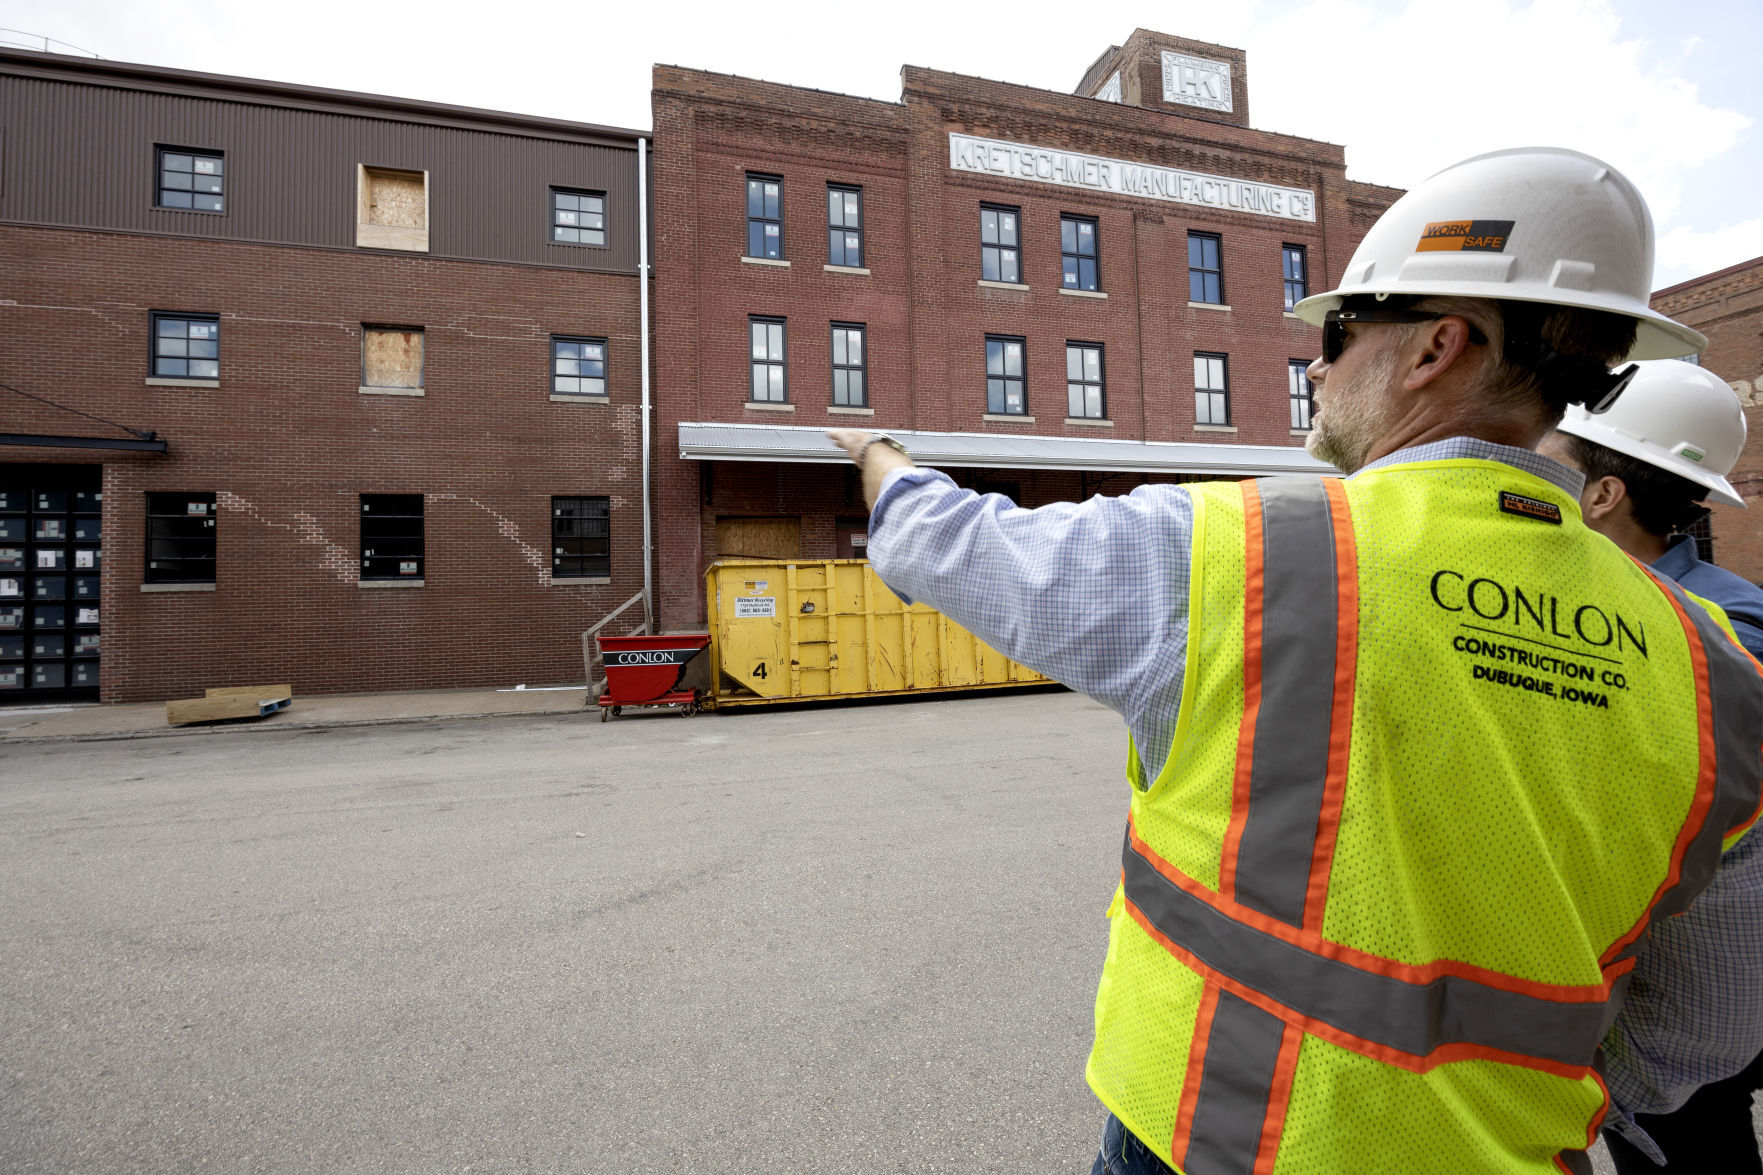 Conlon Construction President and Chief Operating Officer Matt Mulligan points out areas of the Kretschmer Manufacturing building, 220 E. Ninth St., on Thursday, July 7, 2022. The building will be home to 48 apartment units.    PHOTO CREDIT: Stephen Gassman